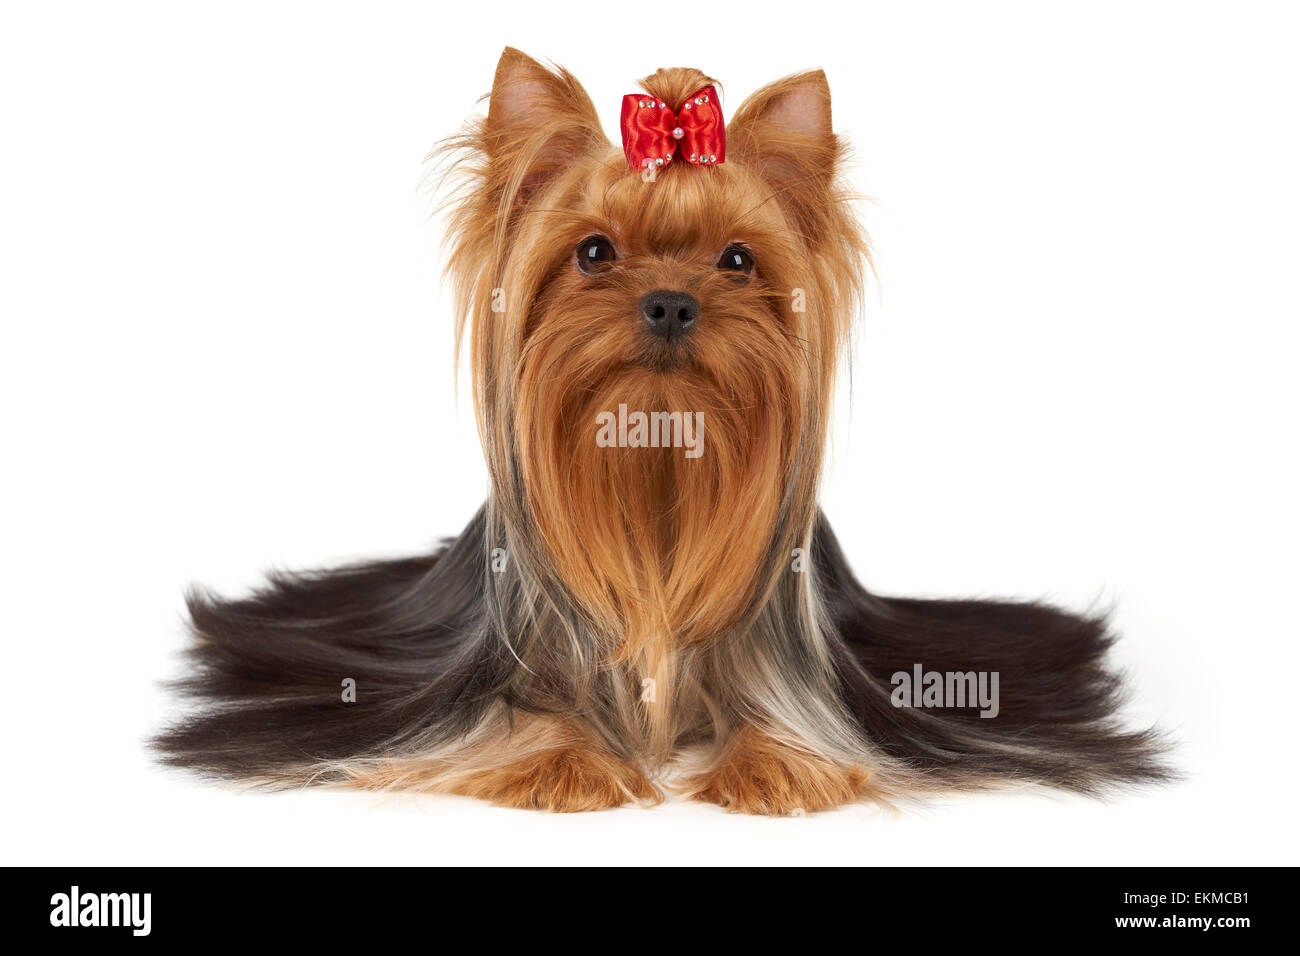 This purebred Yorkshire Terrier has beautiful long hair that was groomed by professional breeder. It has bright red hair on head Stock Photo